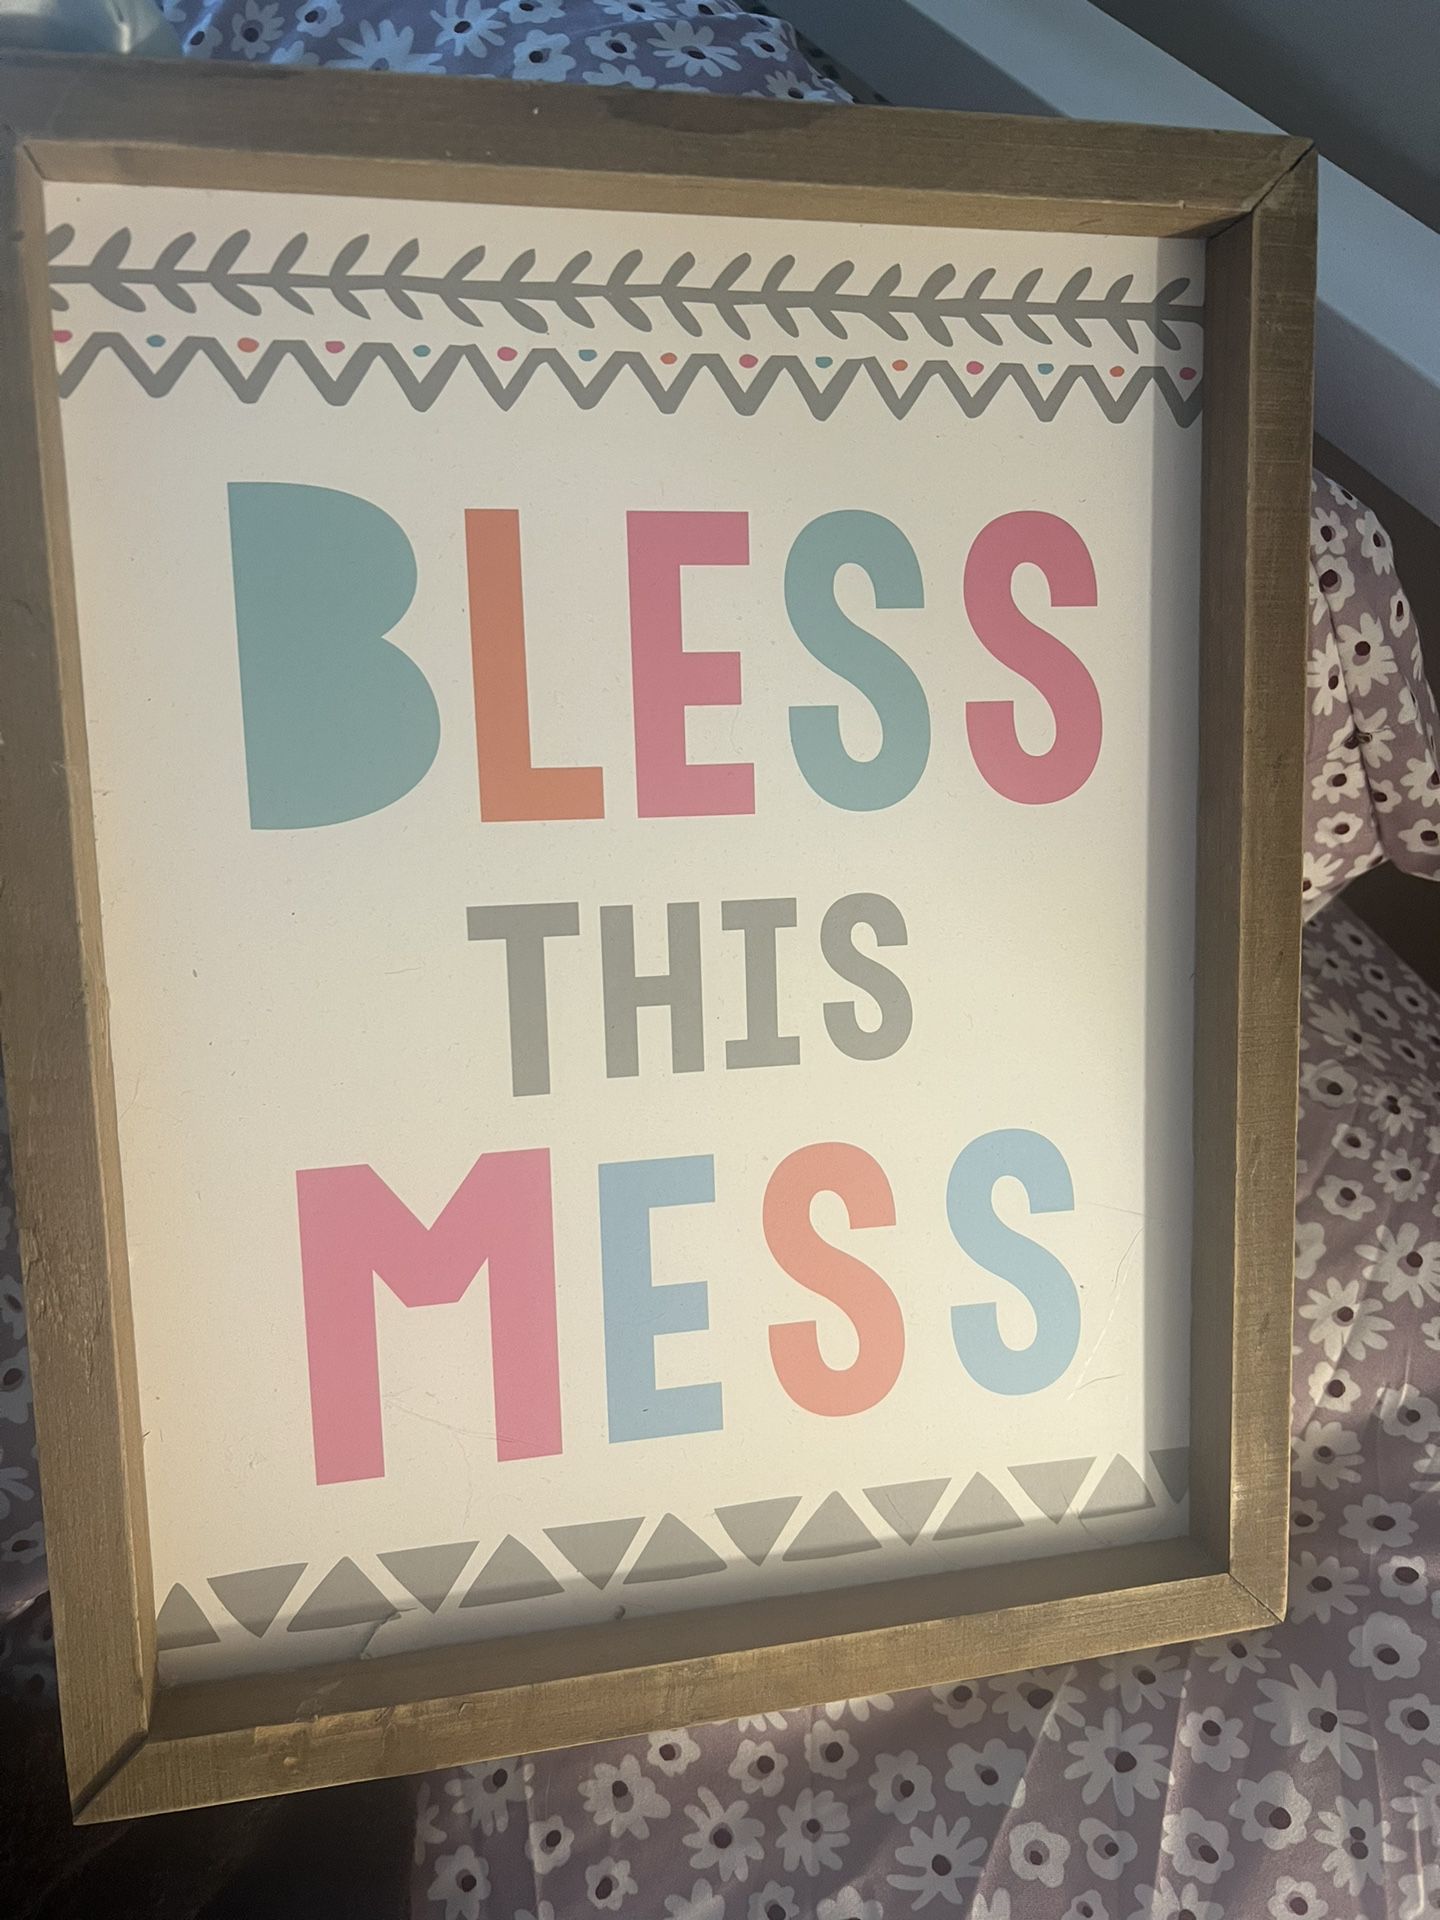 Bless This Mess Wall Art 